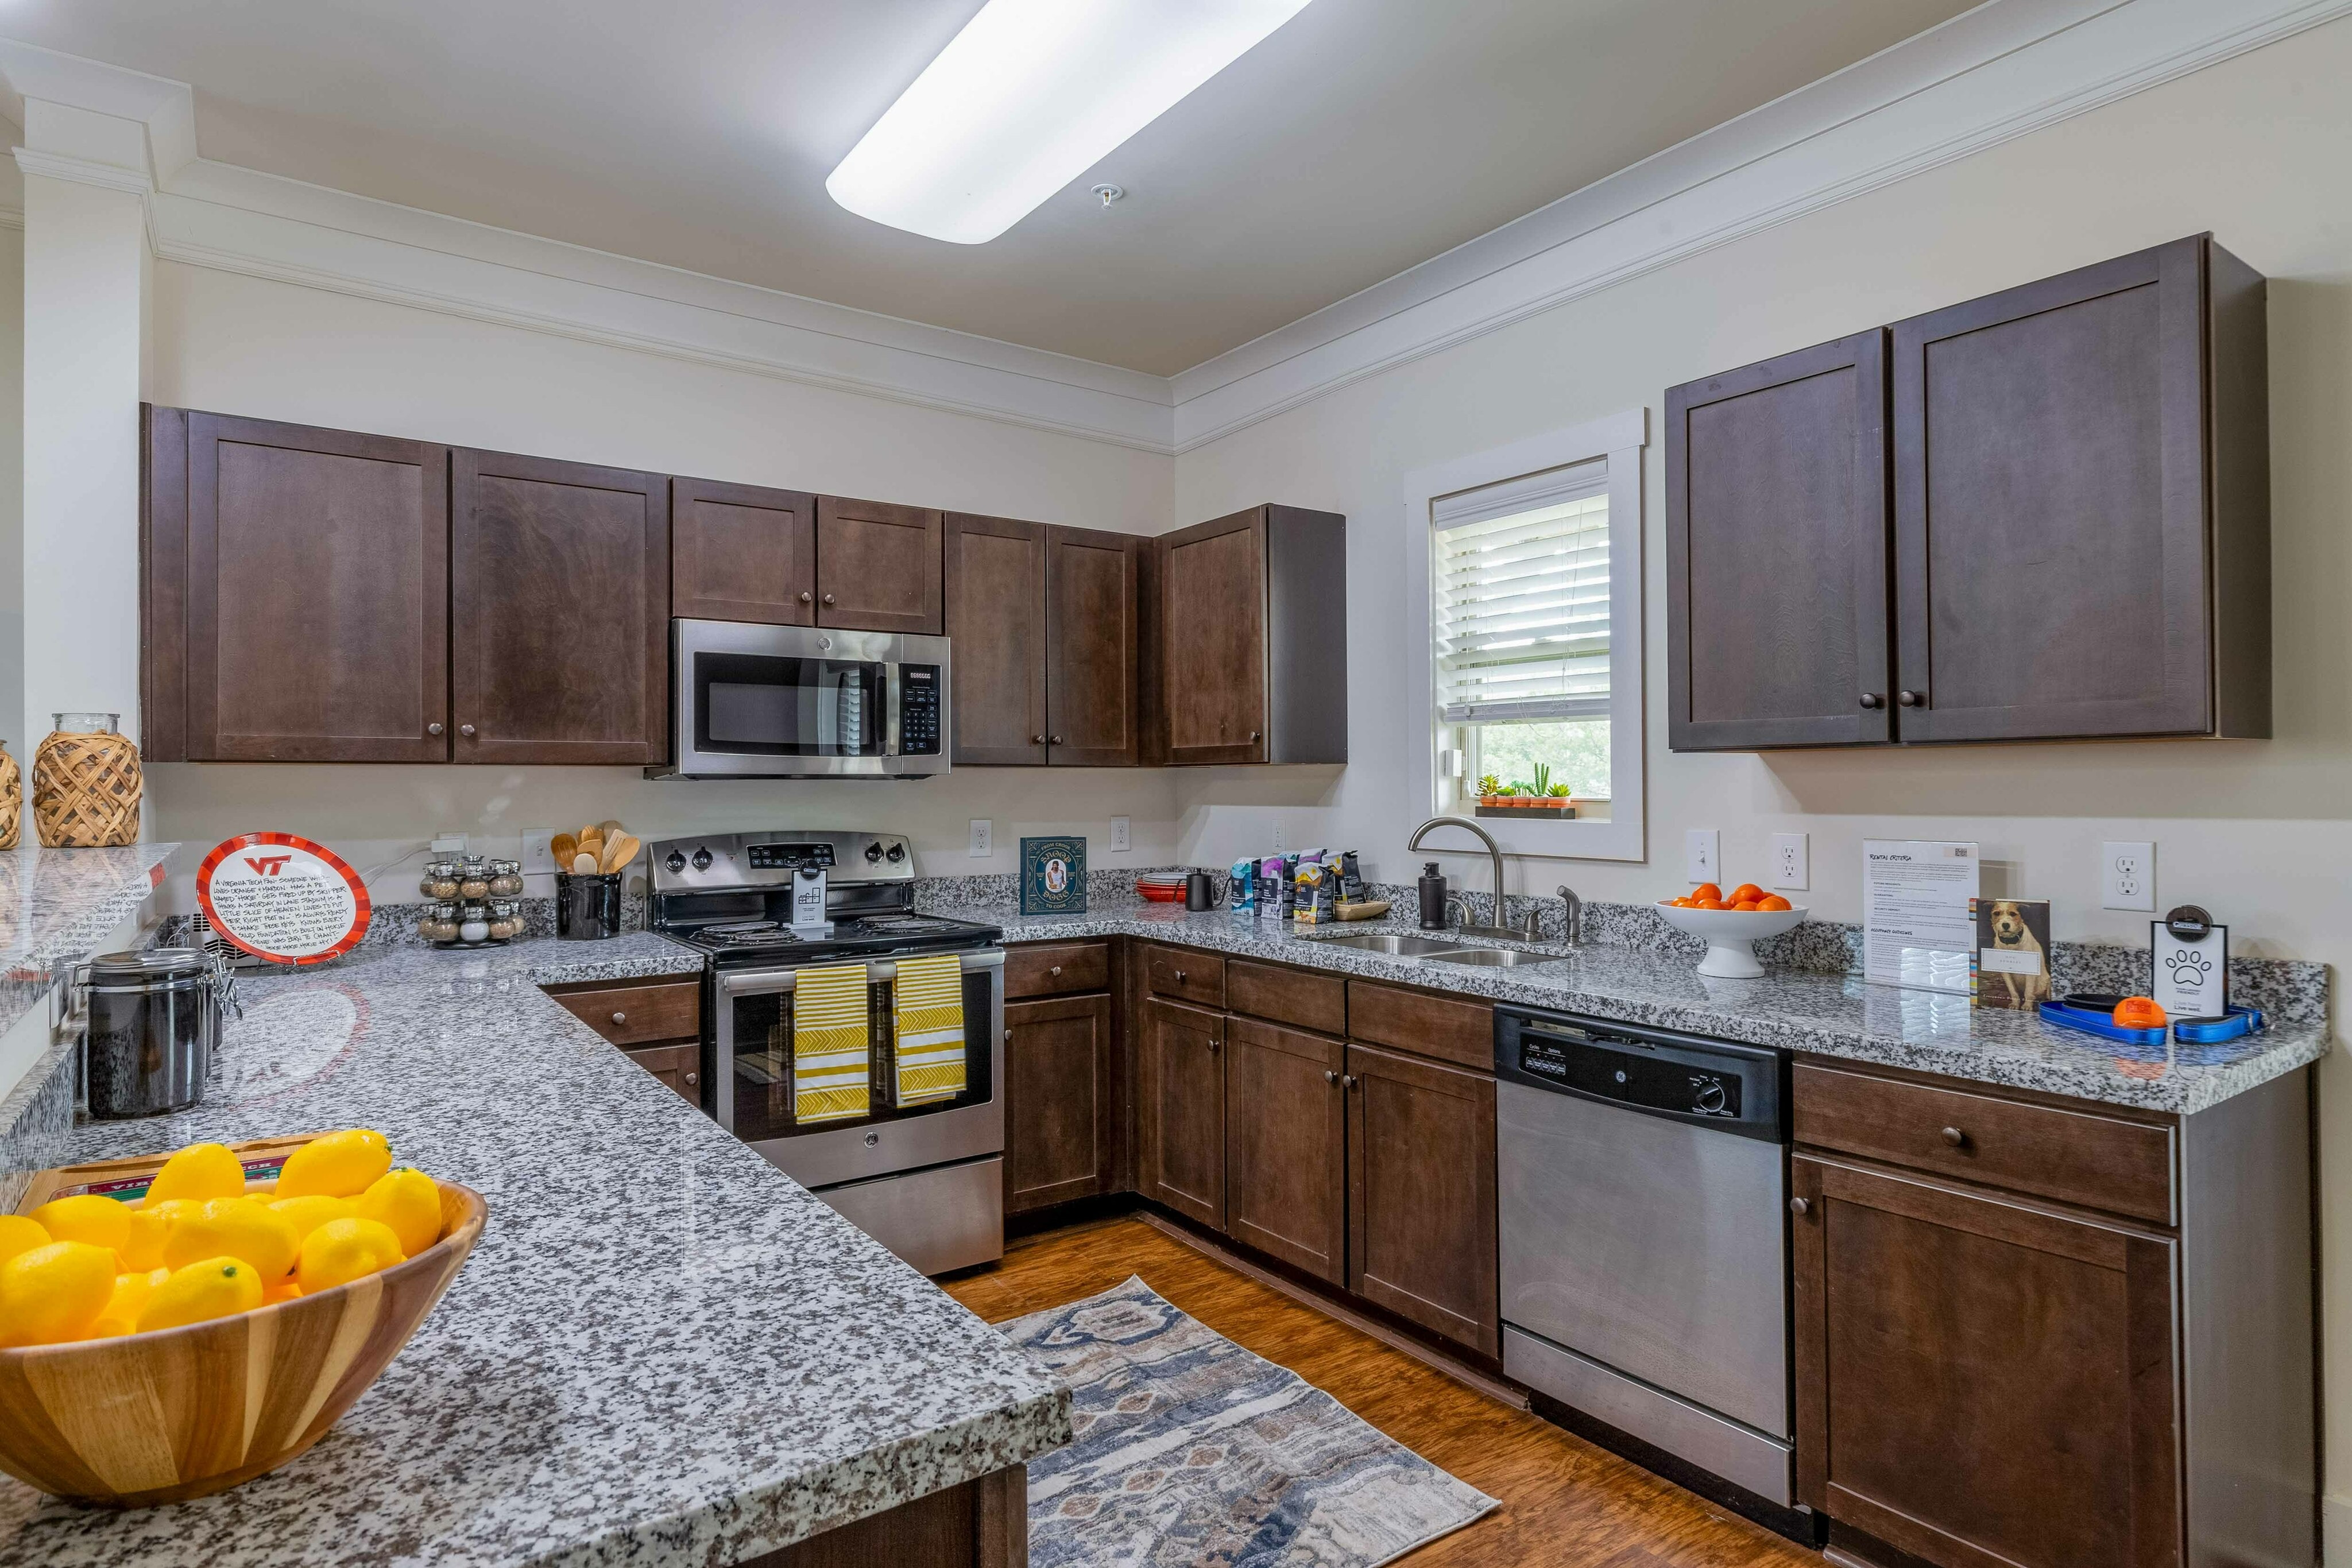 Model apartment kitchen with brown cabinets and stainless steel appliances